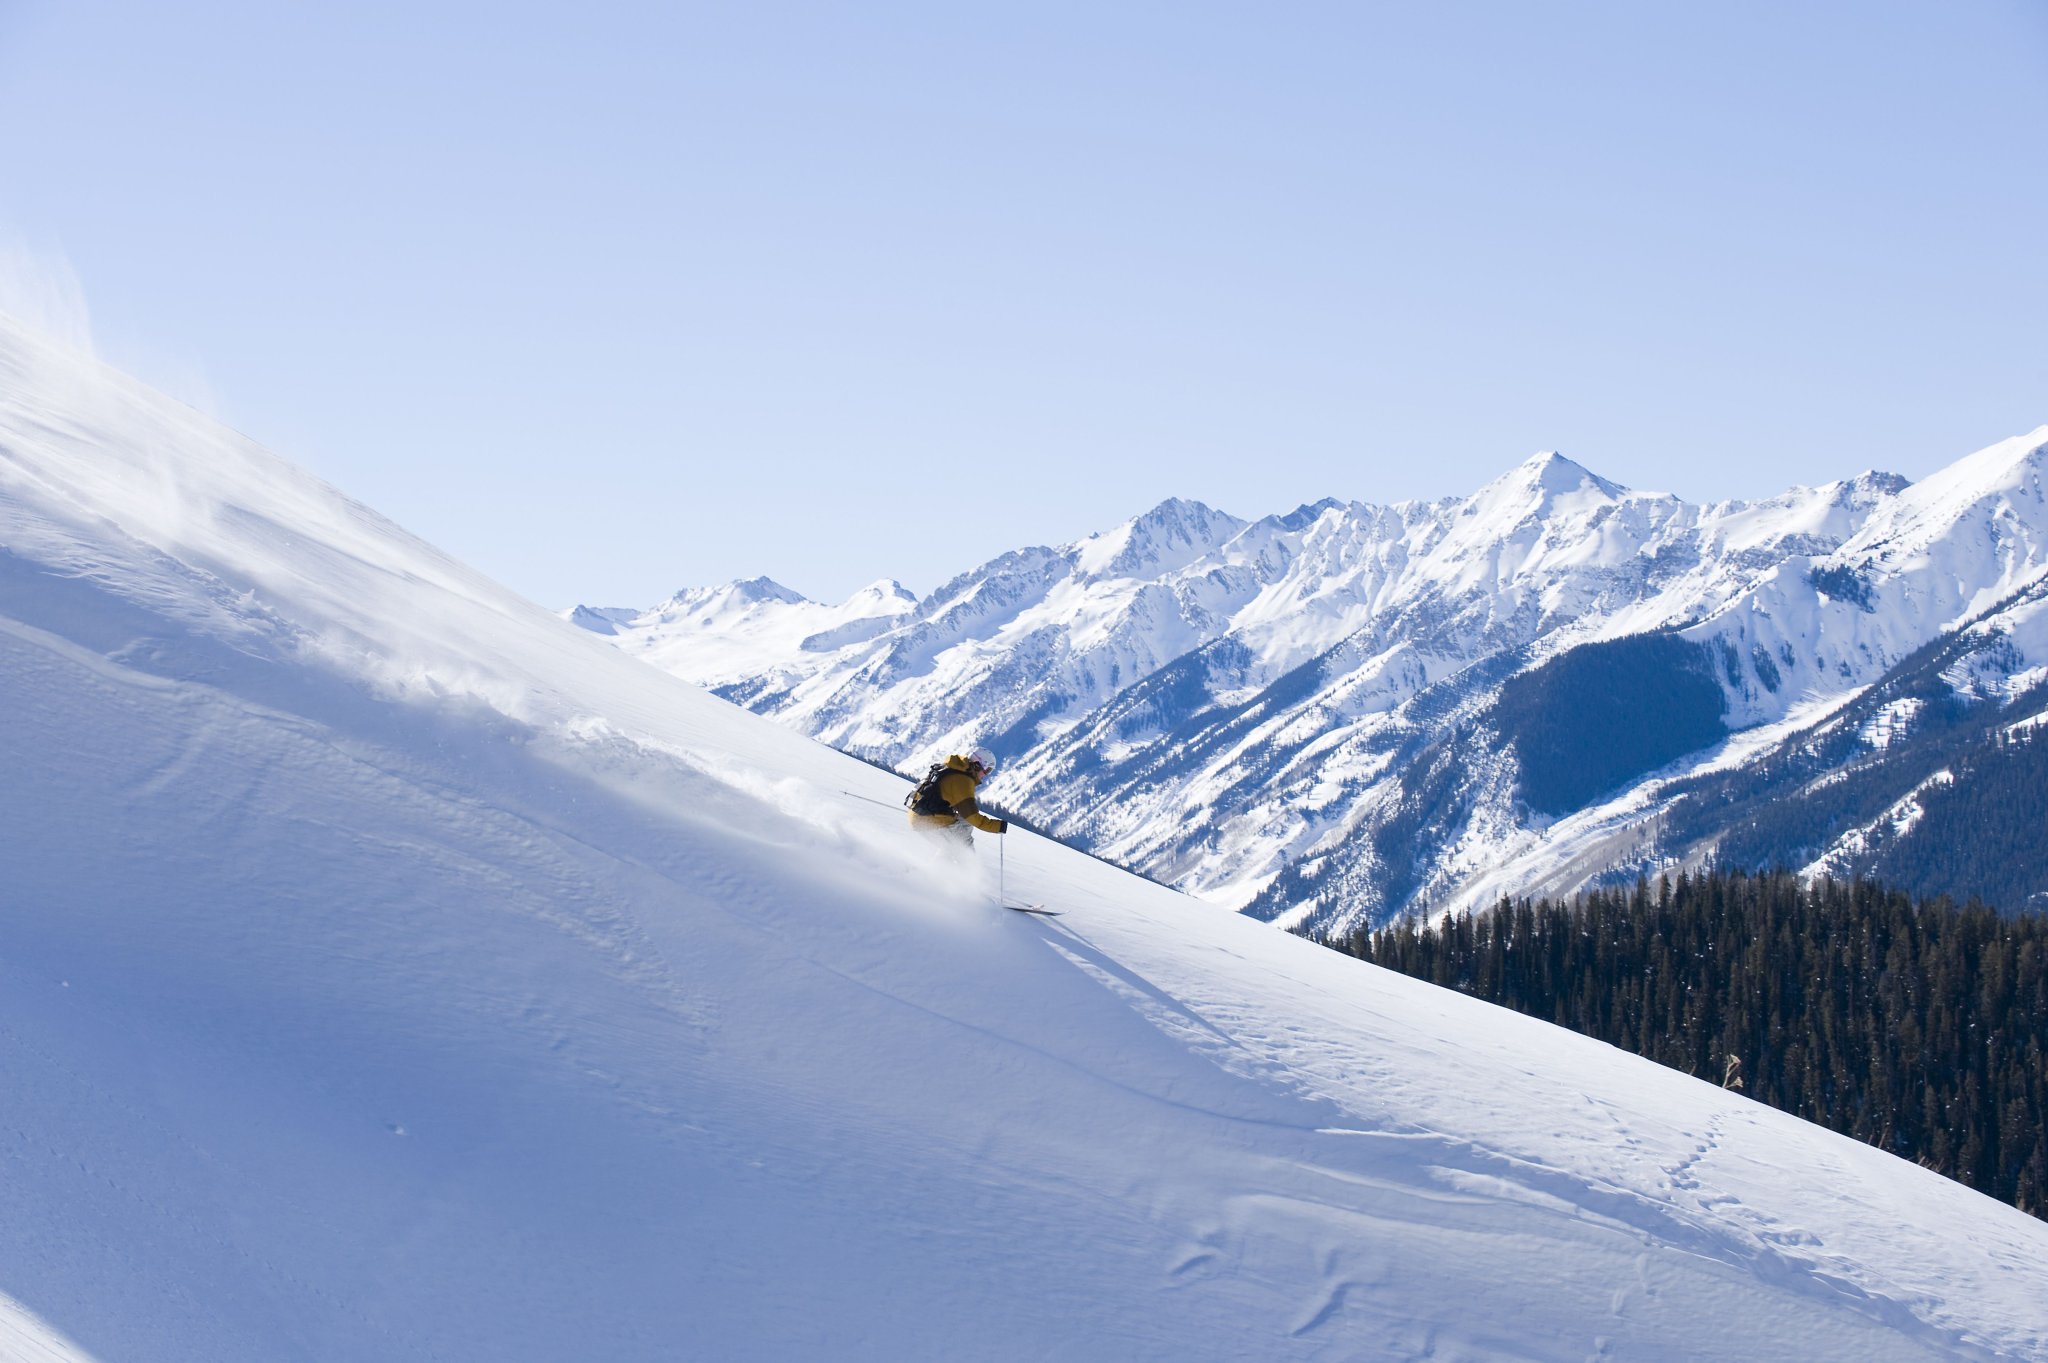 The 10 Highest Ski Mountains in the United States